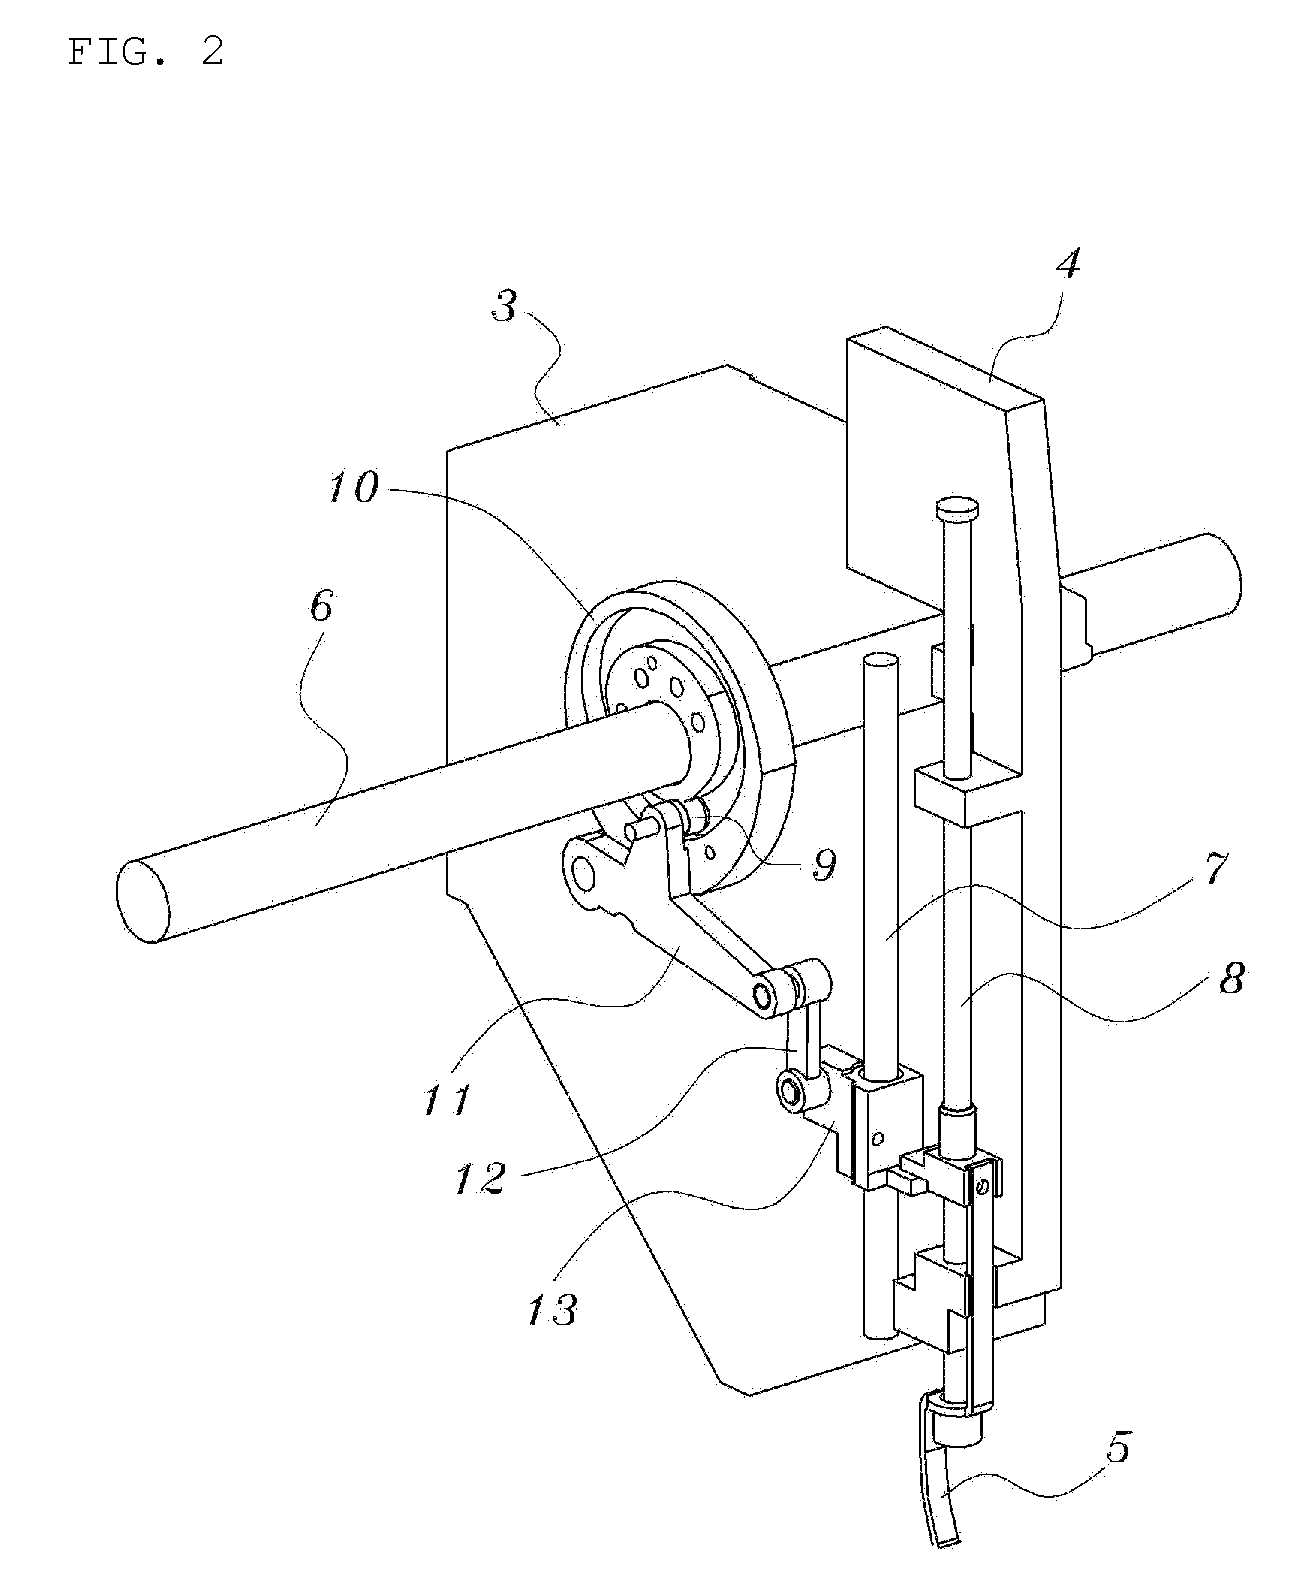 Apparatus for Lifting Presser Foot of Embroidery Machine